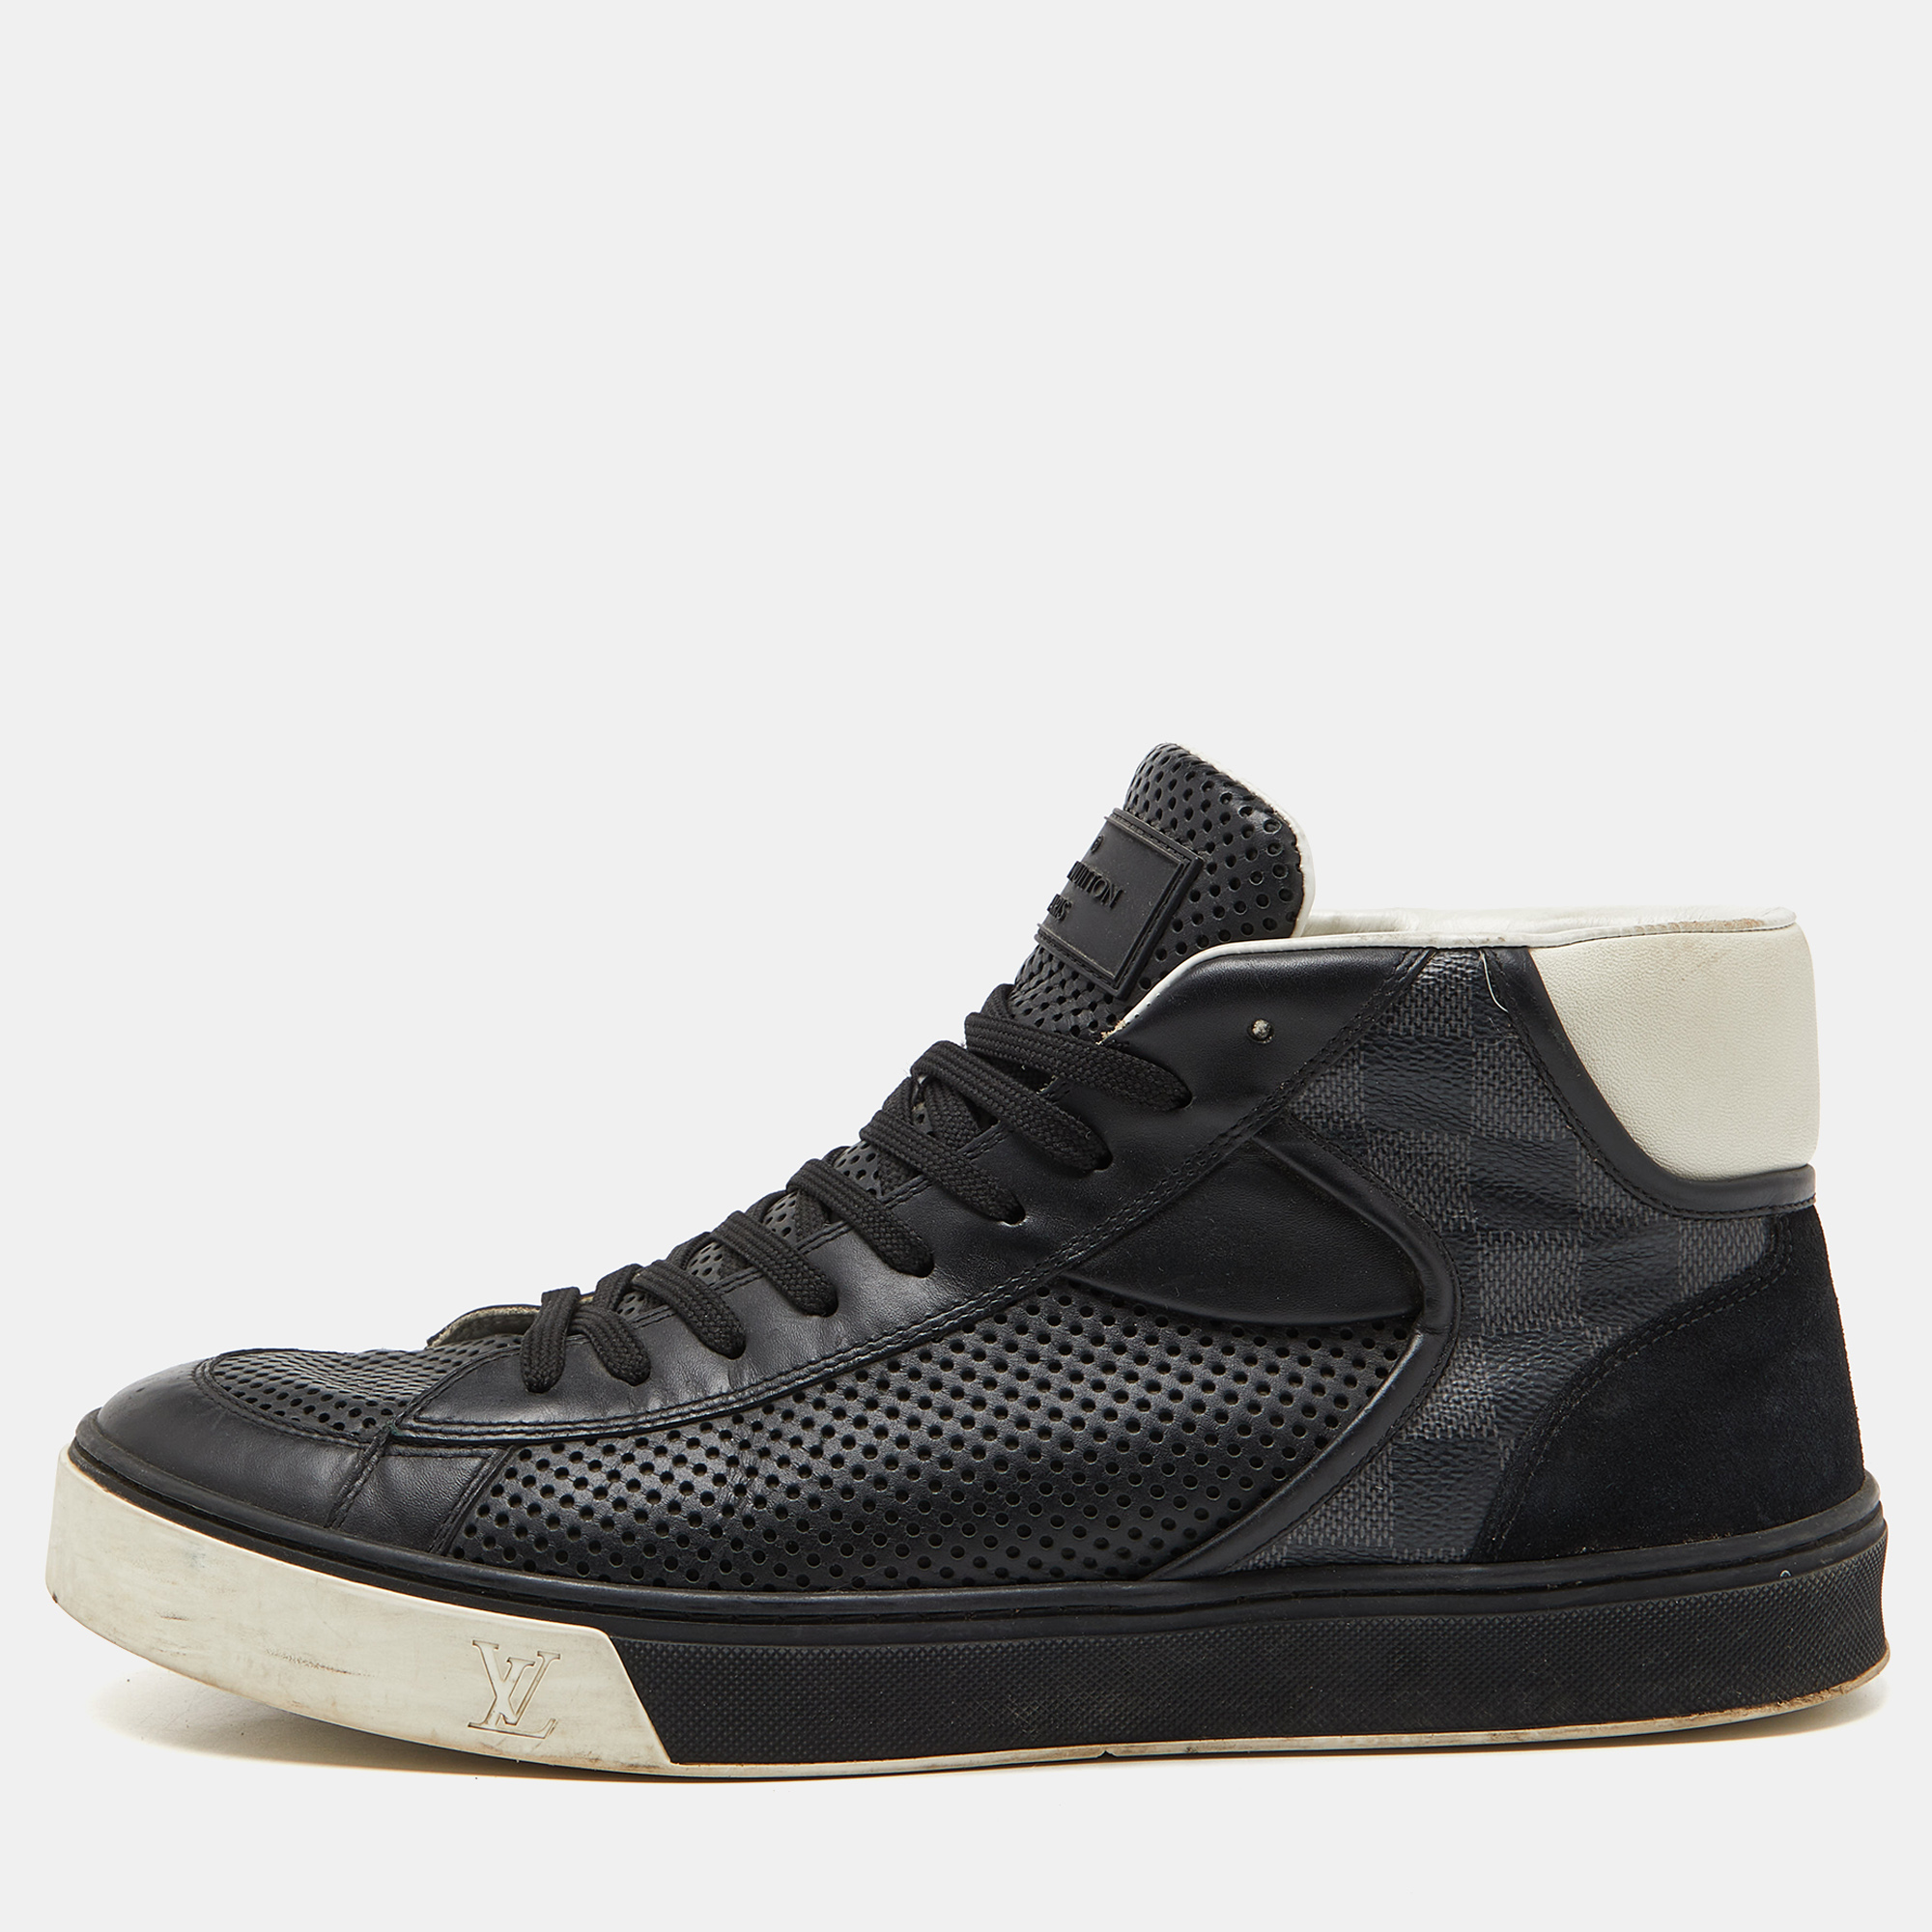 Give your outfit a luxe update with this pair of designer sneakers. The creation is sewn perfectly to help you make a statement in them for a long time.